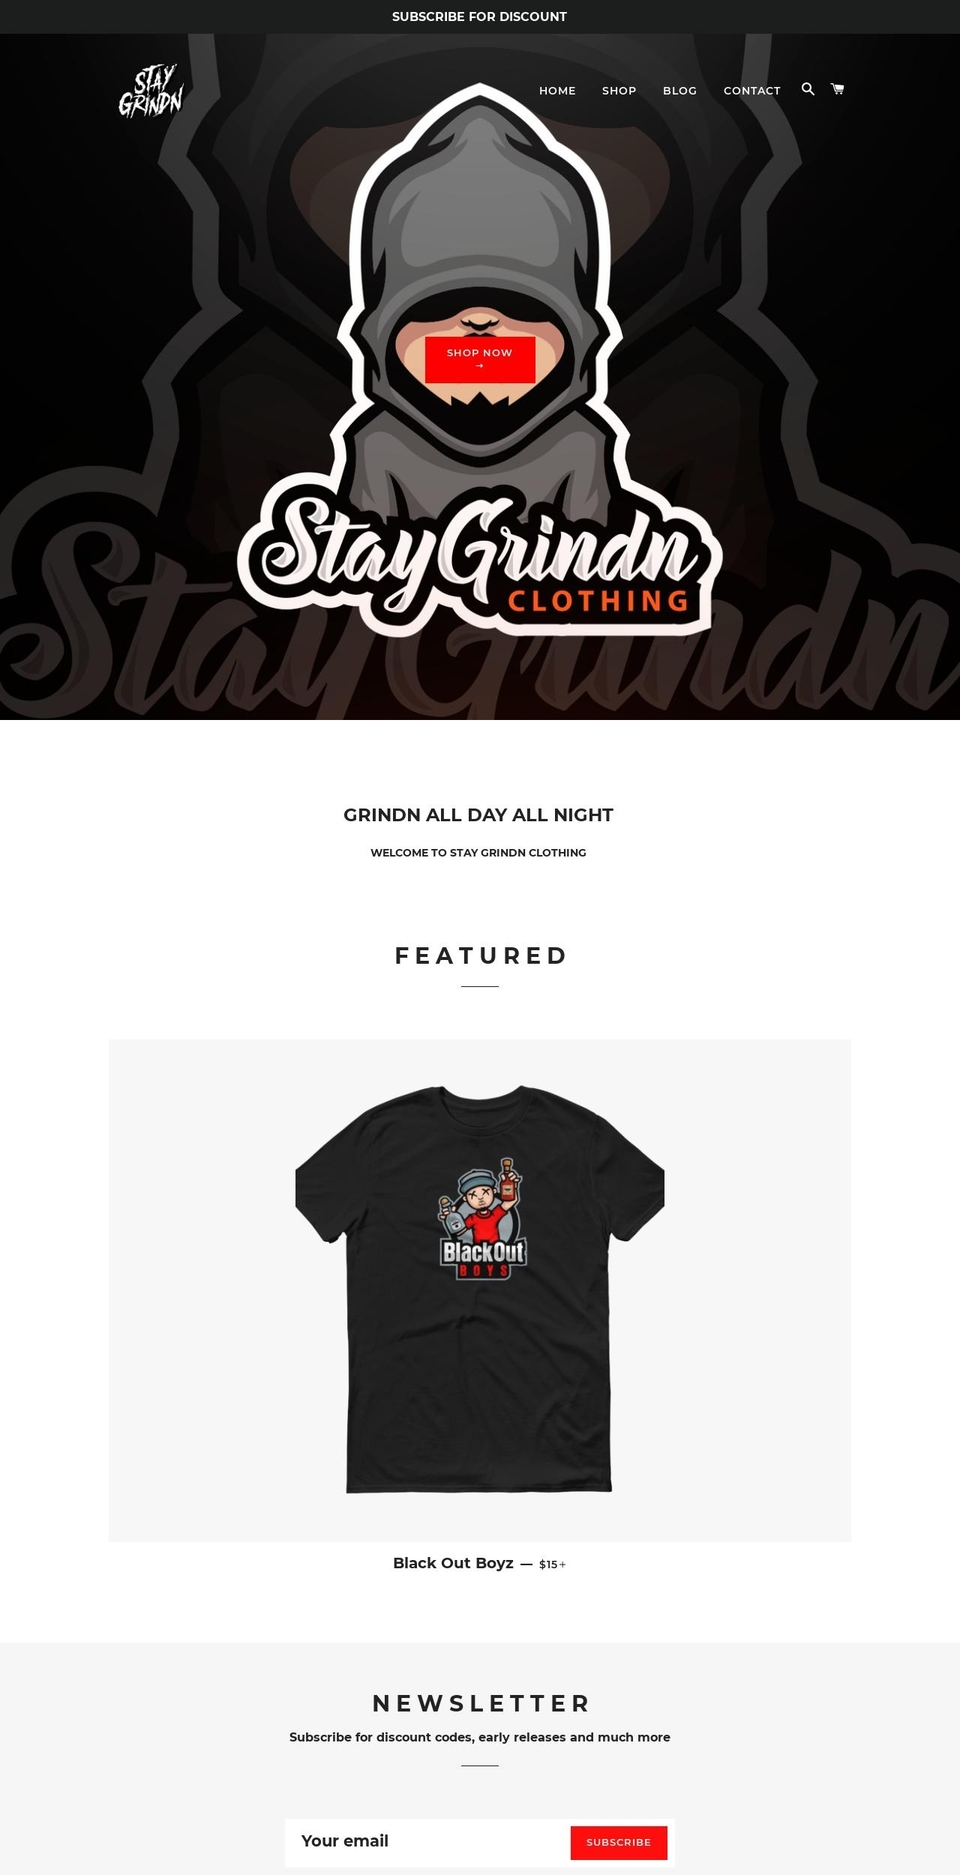 Beyond Shopify theme site example staygrindn.com